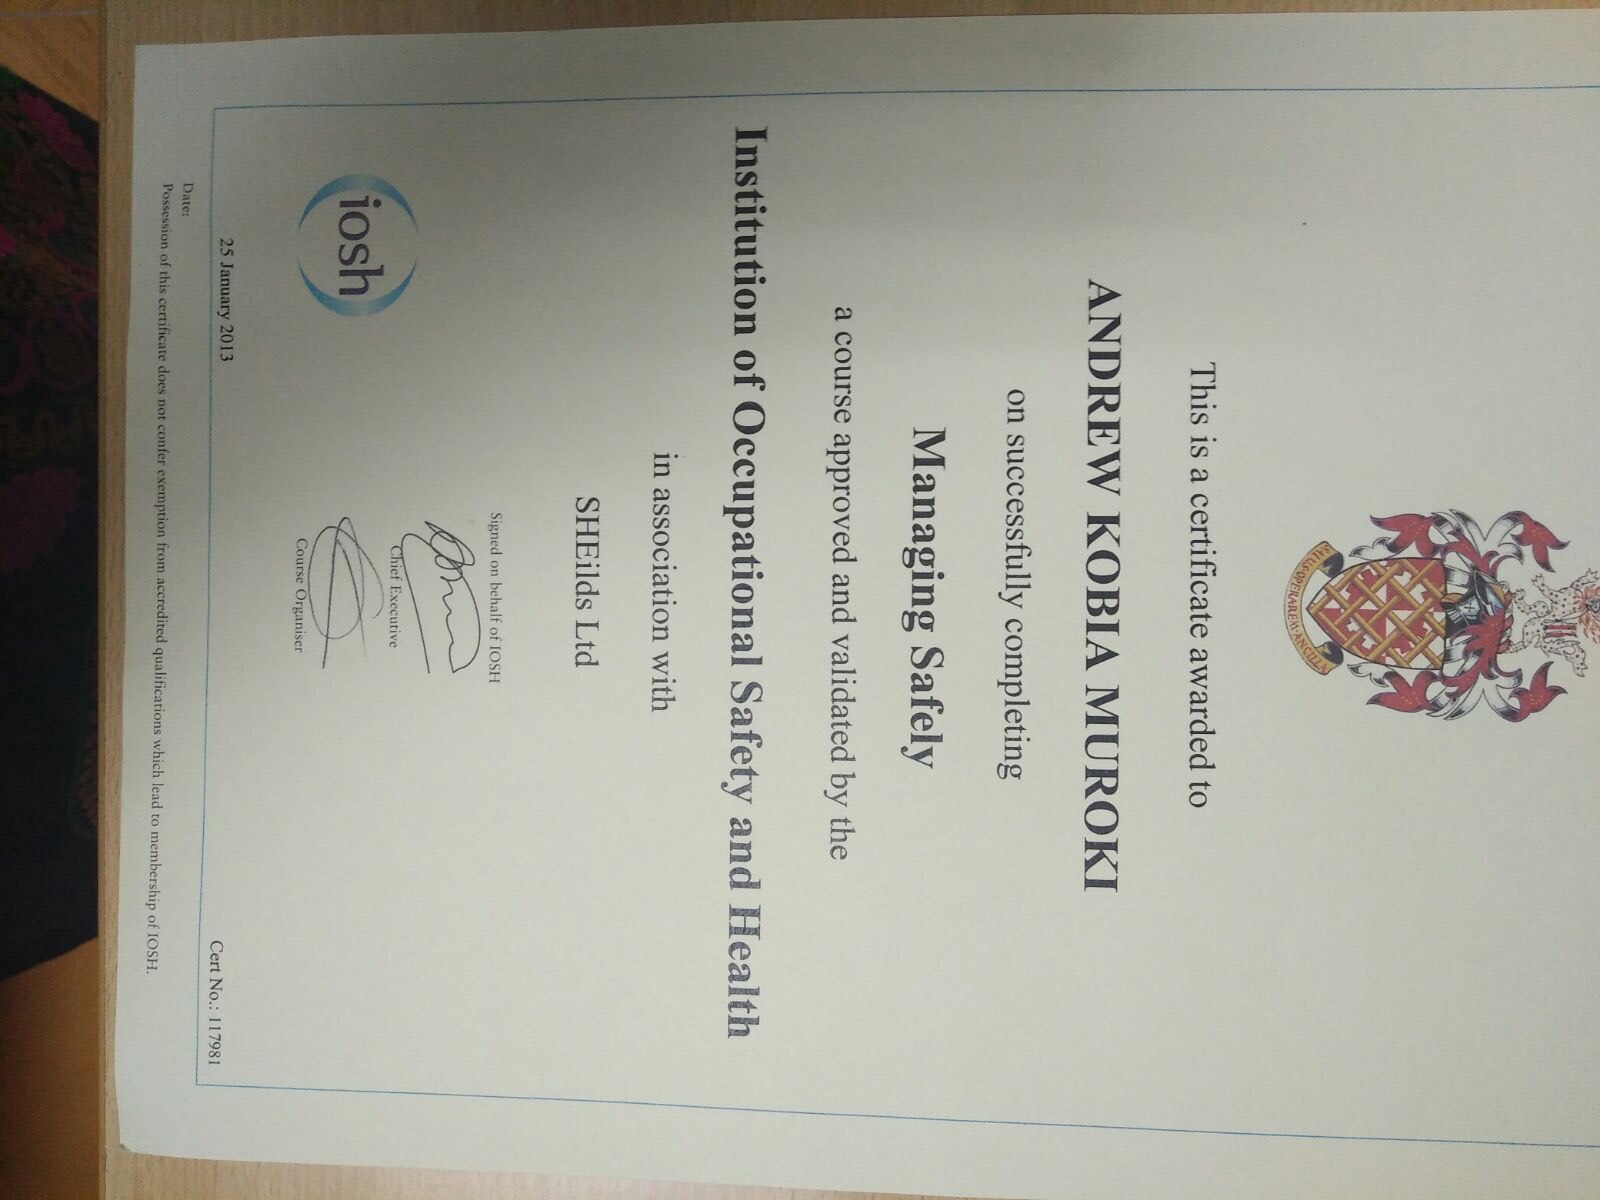 This is a certificate awarded to
ANDREW KOBIA MUROKI
on successfully completing
Managing Safely
a course approved and validated by the

tion of Occupational Safety and Health
in association with

SHEilds Ltd

Cert No.: 117981